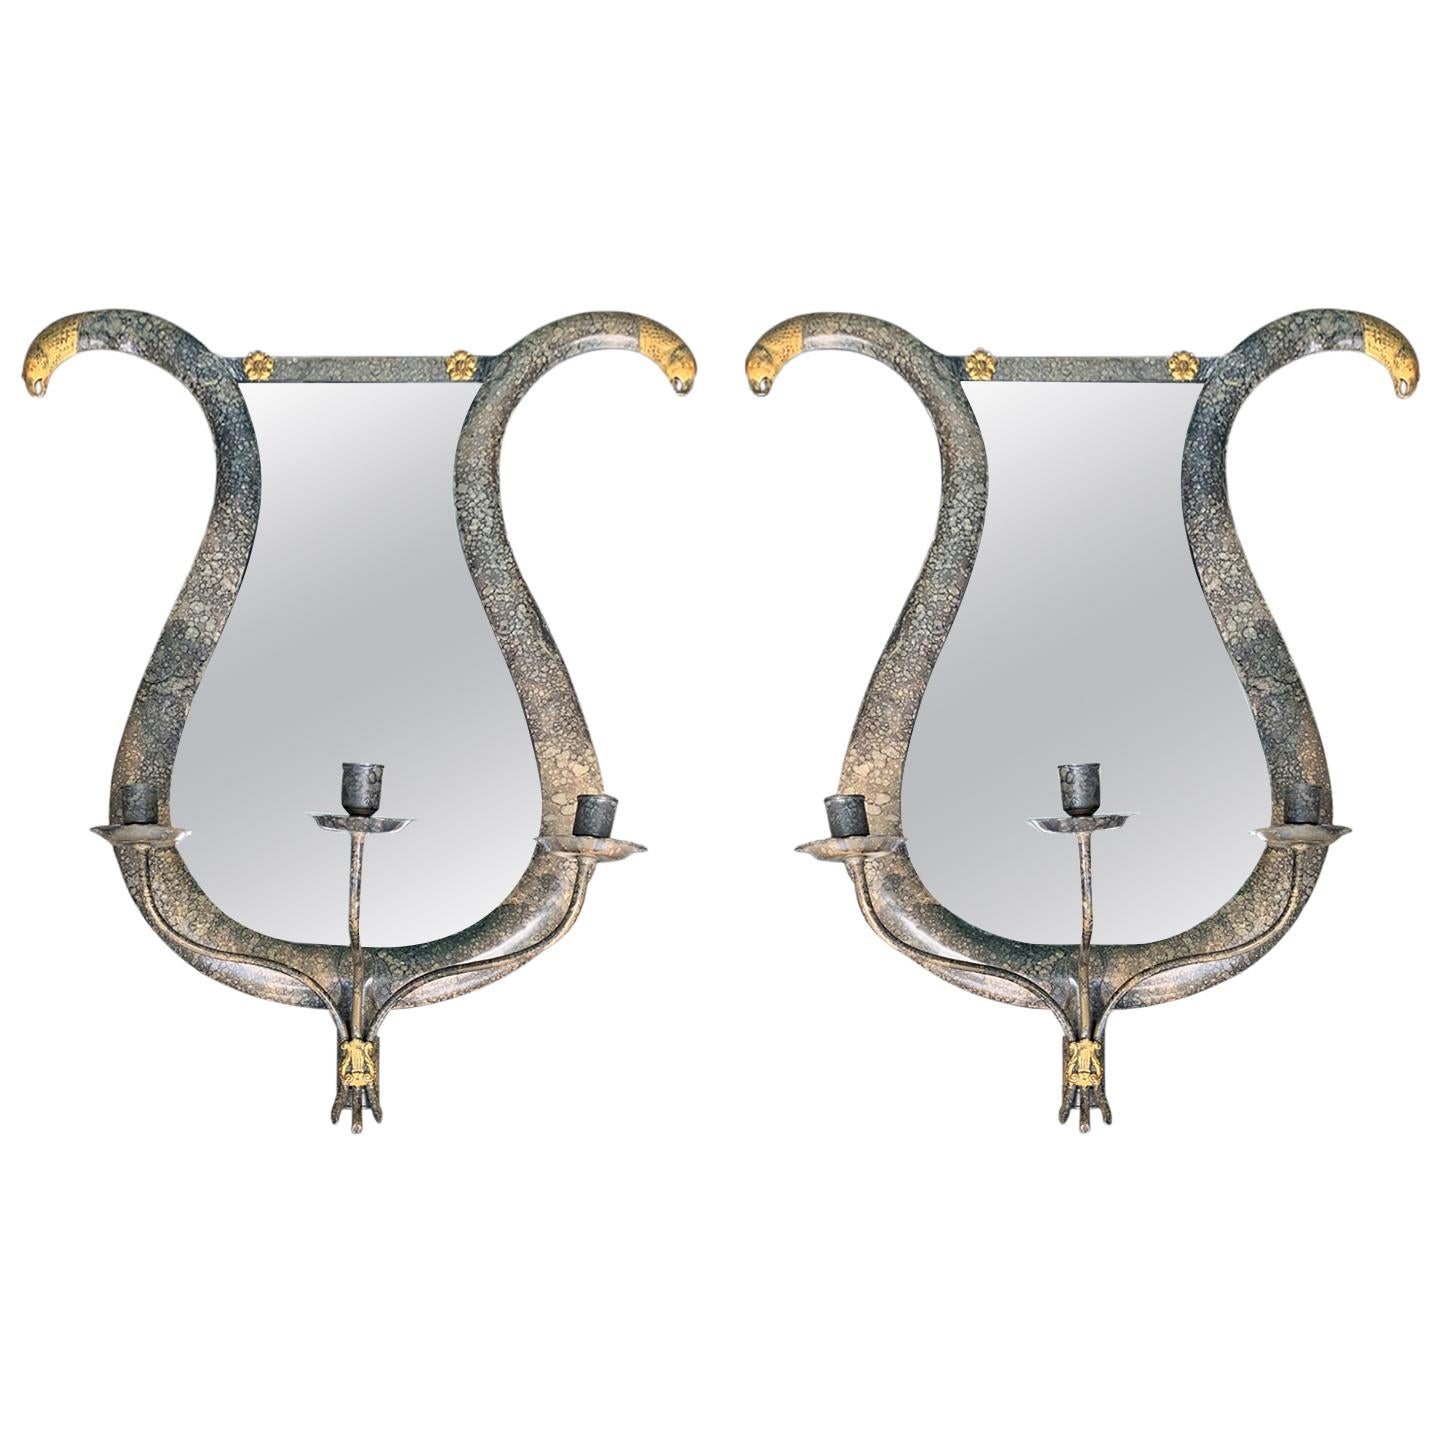 Pair 20th Century Neoclassical Gilt/Polychrome Tole Lyre Form Mirrored Sconces For Sale